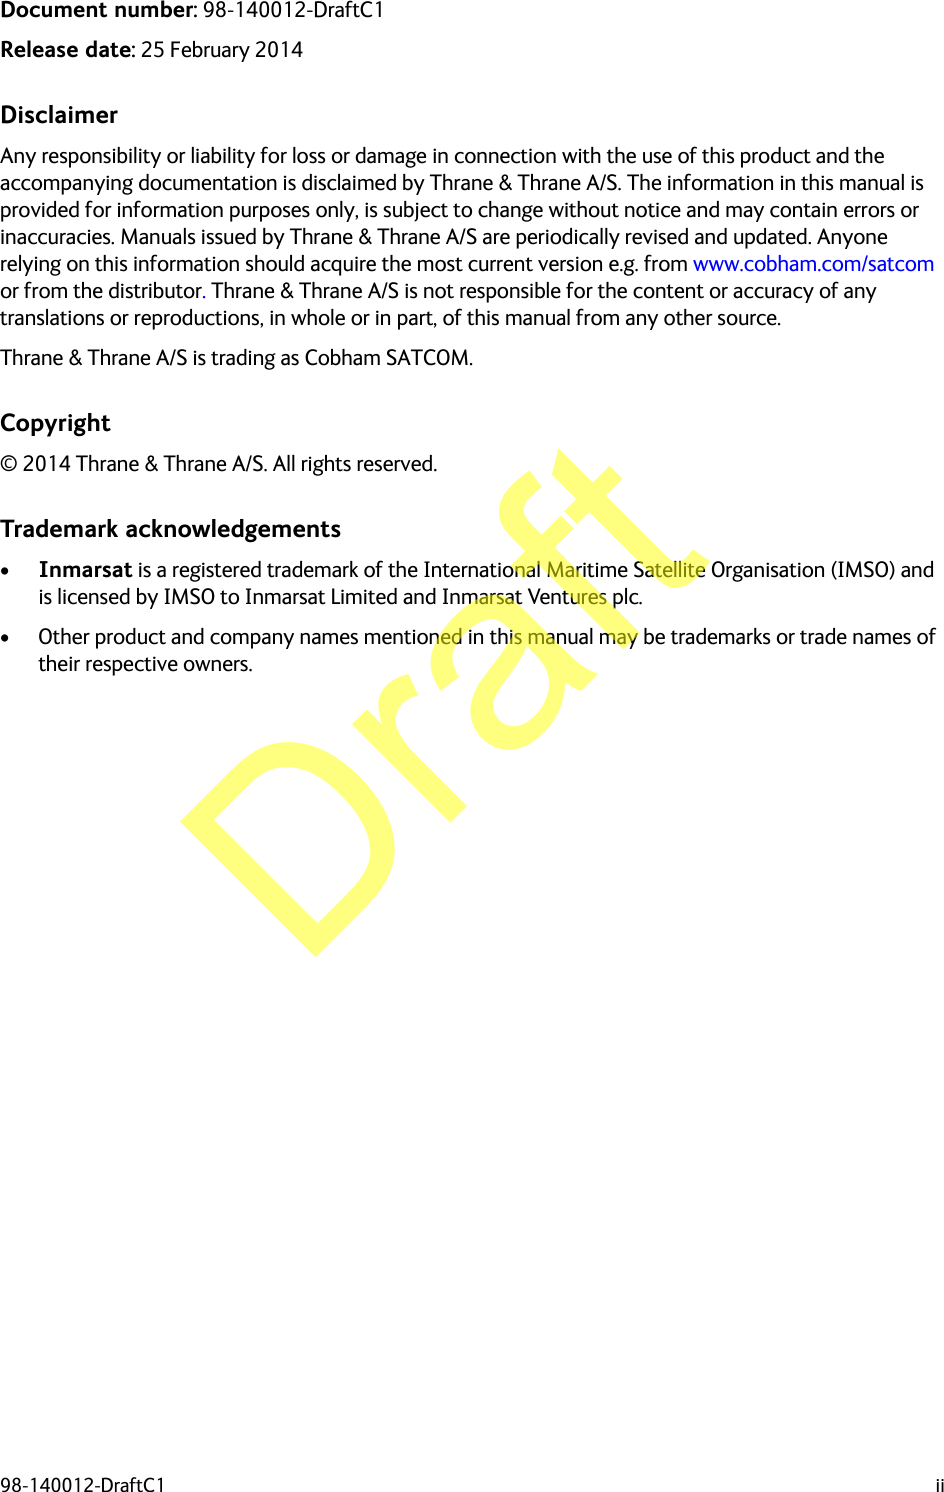 98-140012-DraftC1 iiDocument number: 98-140012-DraftC1Release date: 25 February 2014DisclaimerAny responsibility or liability for loss or damage in connection with the use of this product and the accompanying documentation is disclaimed by Thrane &amp; Thrane A/S. The information in this manual is provided for information purposes only, is subject to change without notice and may contain errors or inaccuracies. Manuals issued by Thrane &amp; Thrane A/S are periodically revised and updated. Anyone relying on this information should acquire the most current version e.g. from www.cobham.com/satcom or from the distributor. Thrane &amp; Thrane A/S is not responsible for the content or accuracy of any translations or reproductions, in whole or in part, of this manual from any other source.Thrane &amp; Thrane A/S is trading as Cobham SATCOM.Copyright© 2014 Thrane &amp; Thrane A/S. All rights reserved.Trademark acknowledgements•Inmarsat is a registered trademark of the International Maritime Satellite Organisation (IMSO) and is licensed by IMSO to Inmarsat Limited and Inmarsat Ventures plc. • Other product and company names mentioned in this manual may be trademarks or trade names of their respective owners.Draft